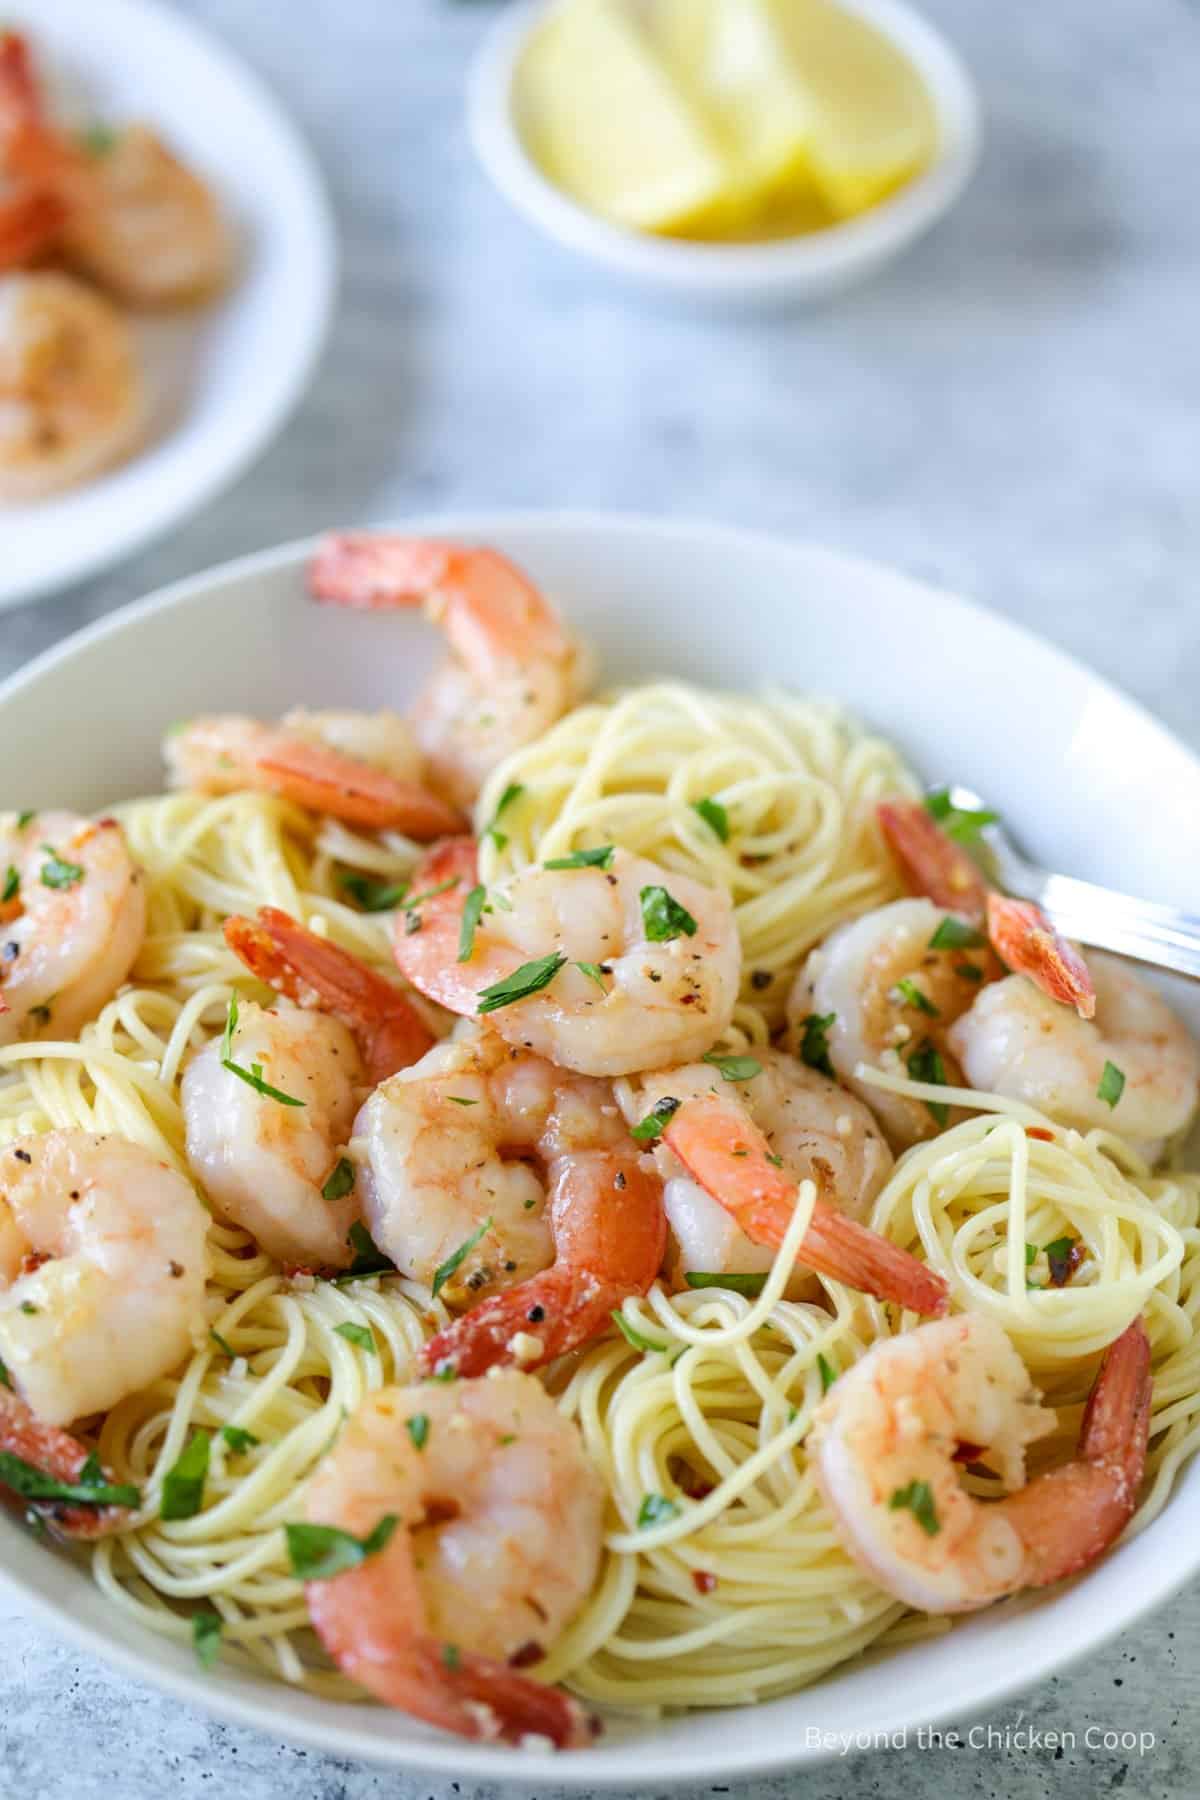 Shrimp and pasta in a bowl.